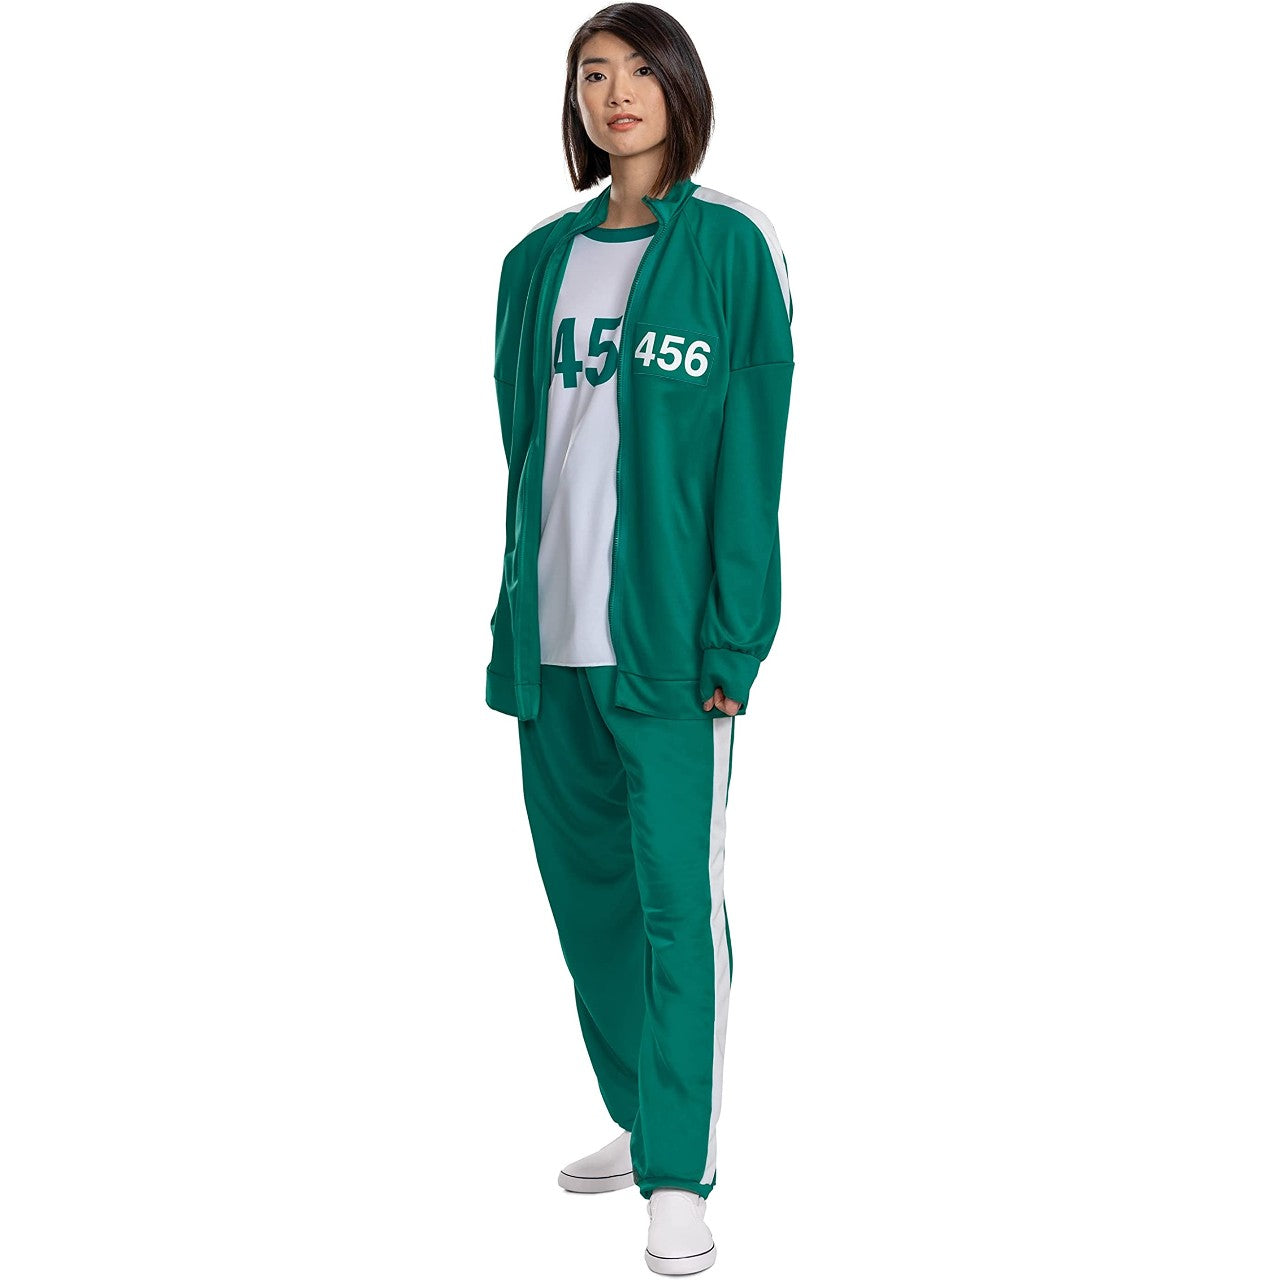 A front view of a woman wearing a a green Squid Game Player 456 adult track suits